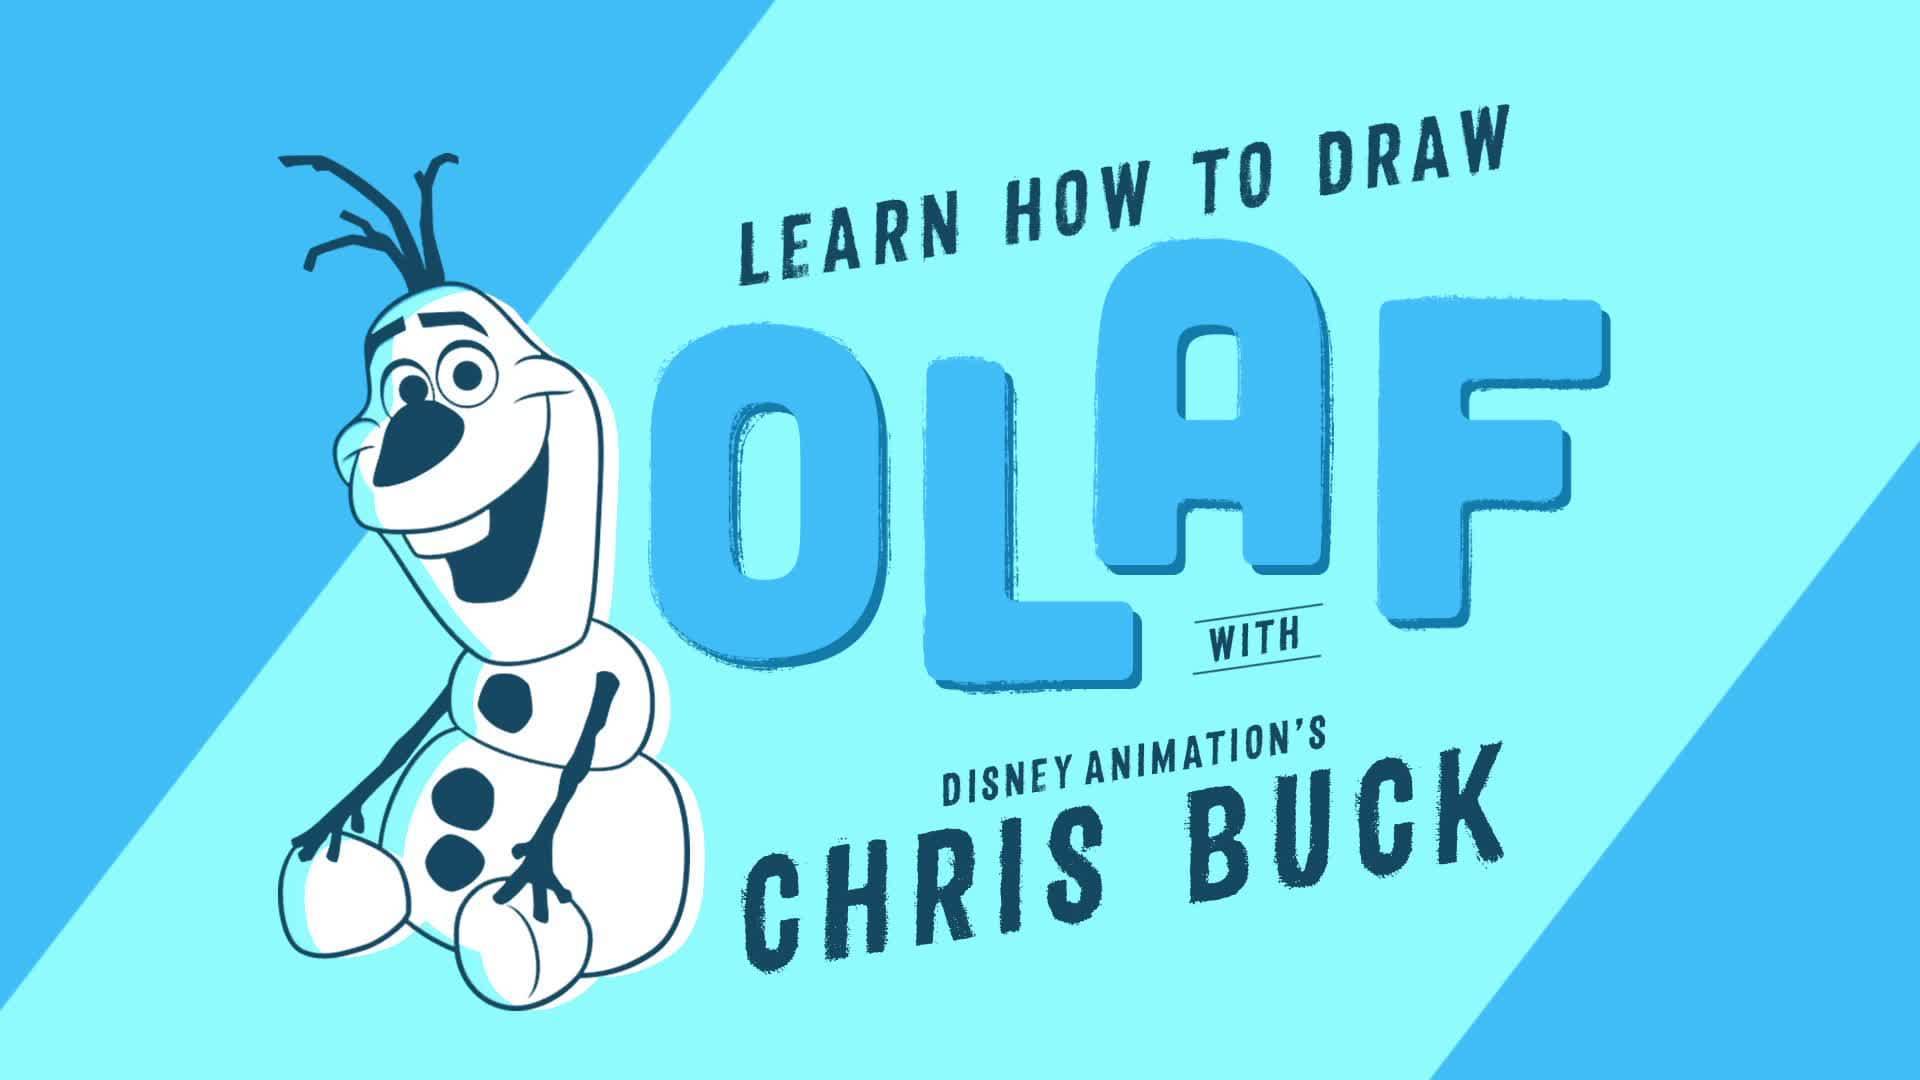 Learn How to Draw Olaf with Disney Animation's Chris Buck